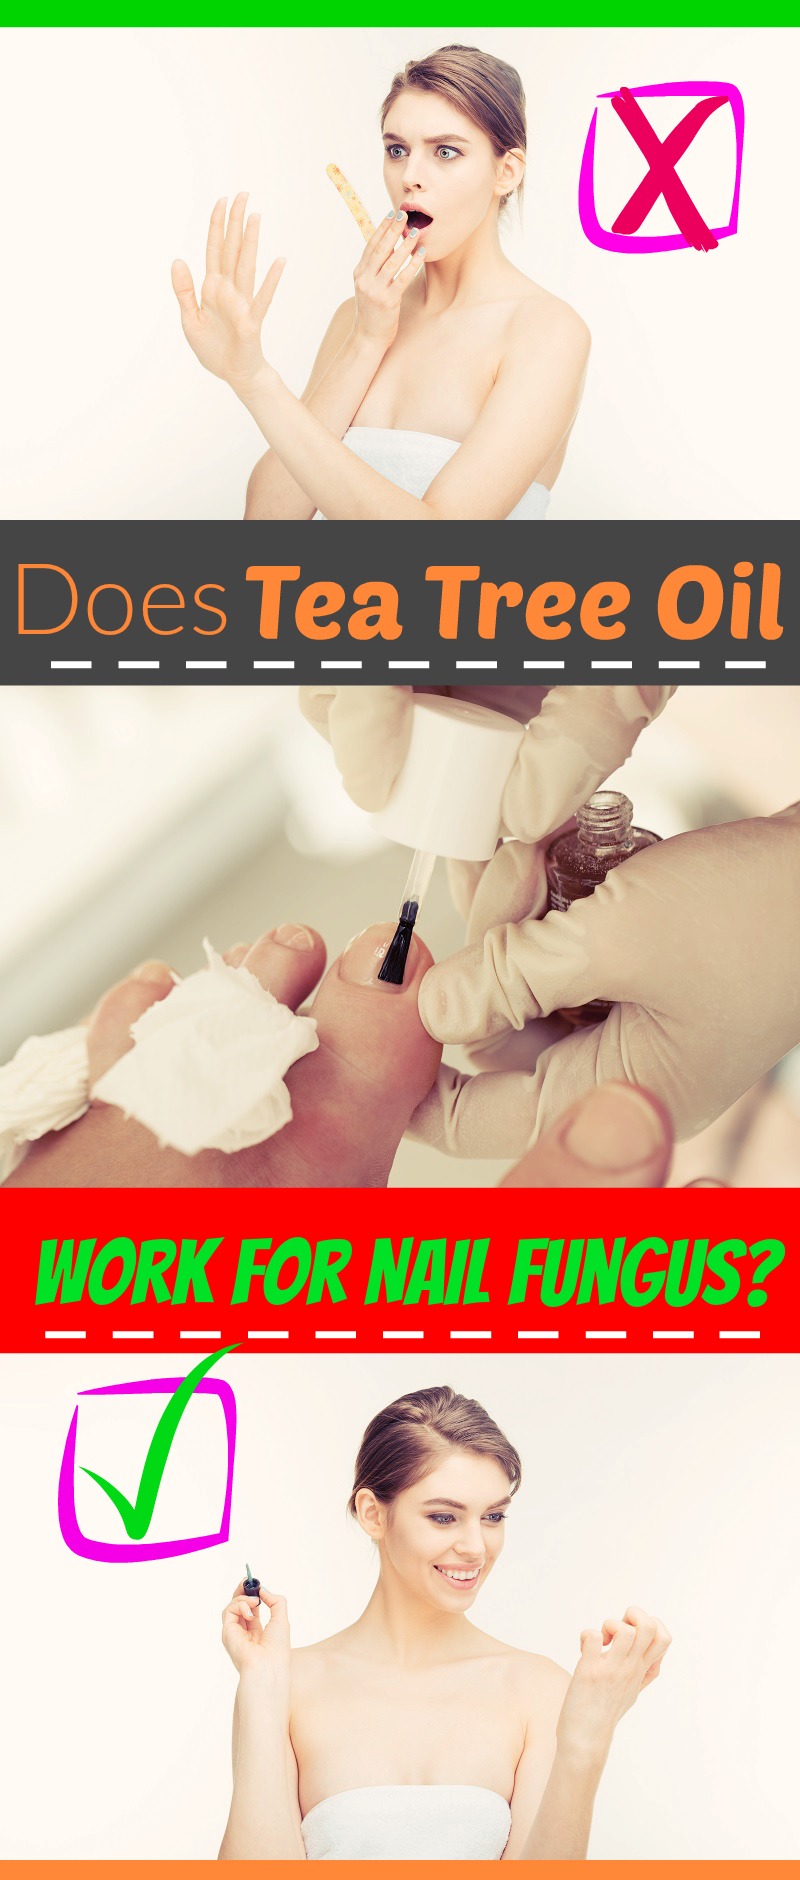 Does Tea Tree Oil Work for Nail Fungus